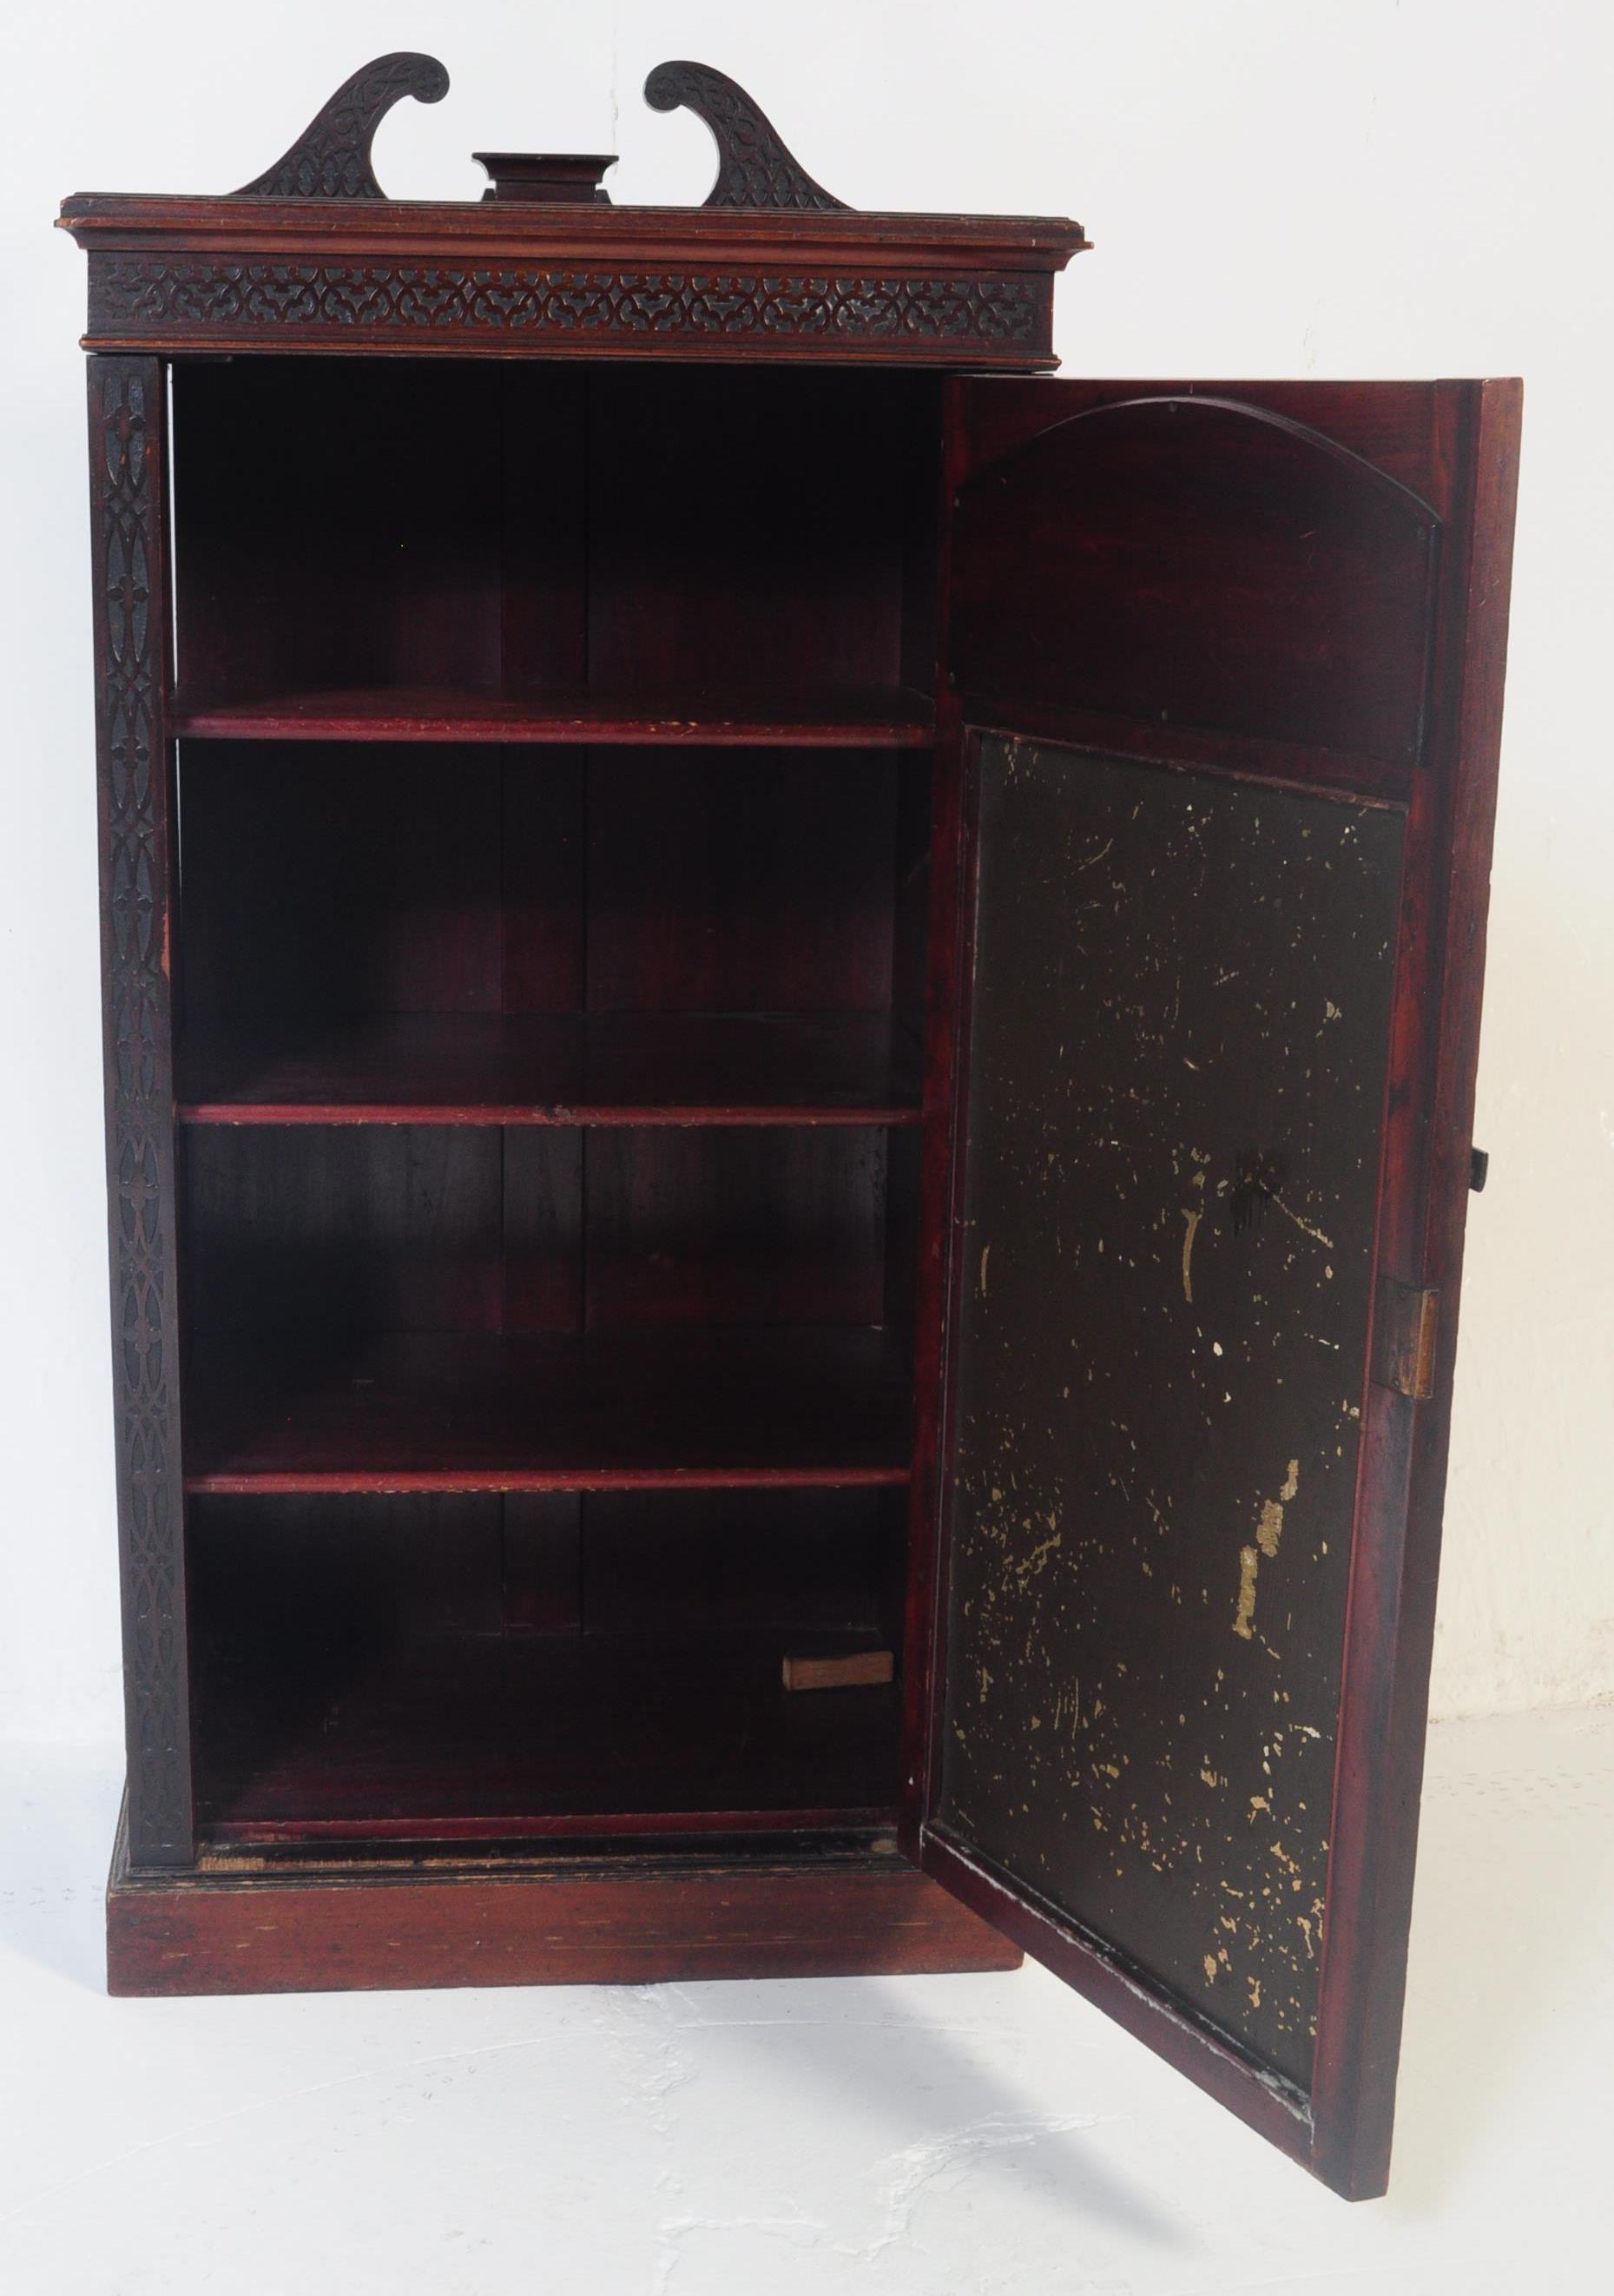 LATE VICTORIAN 19TH CENTURY MAHOGANY PIER CUPBOARD CABINET - Image 5 of 7